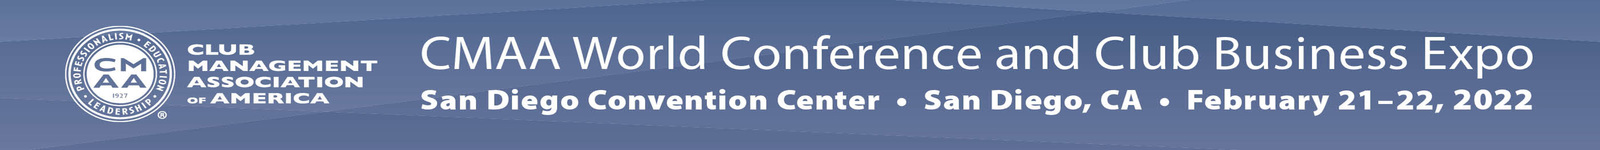 2022 World Conference and Club Business Expo  logo